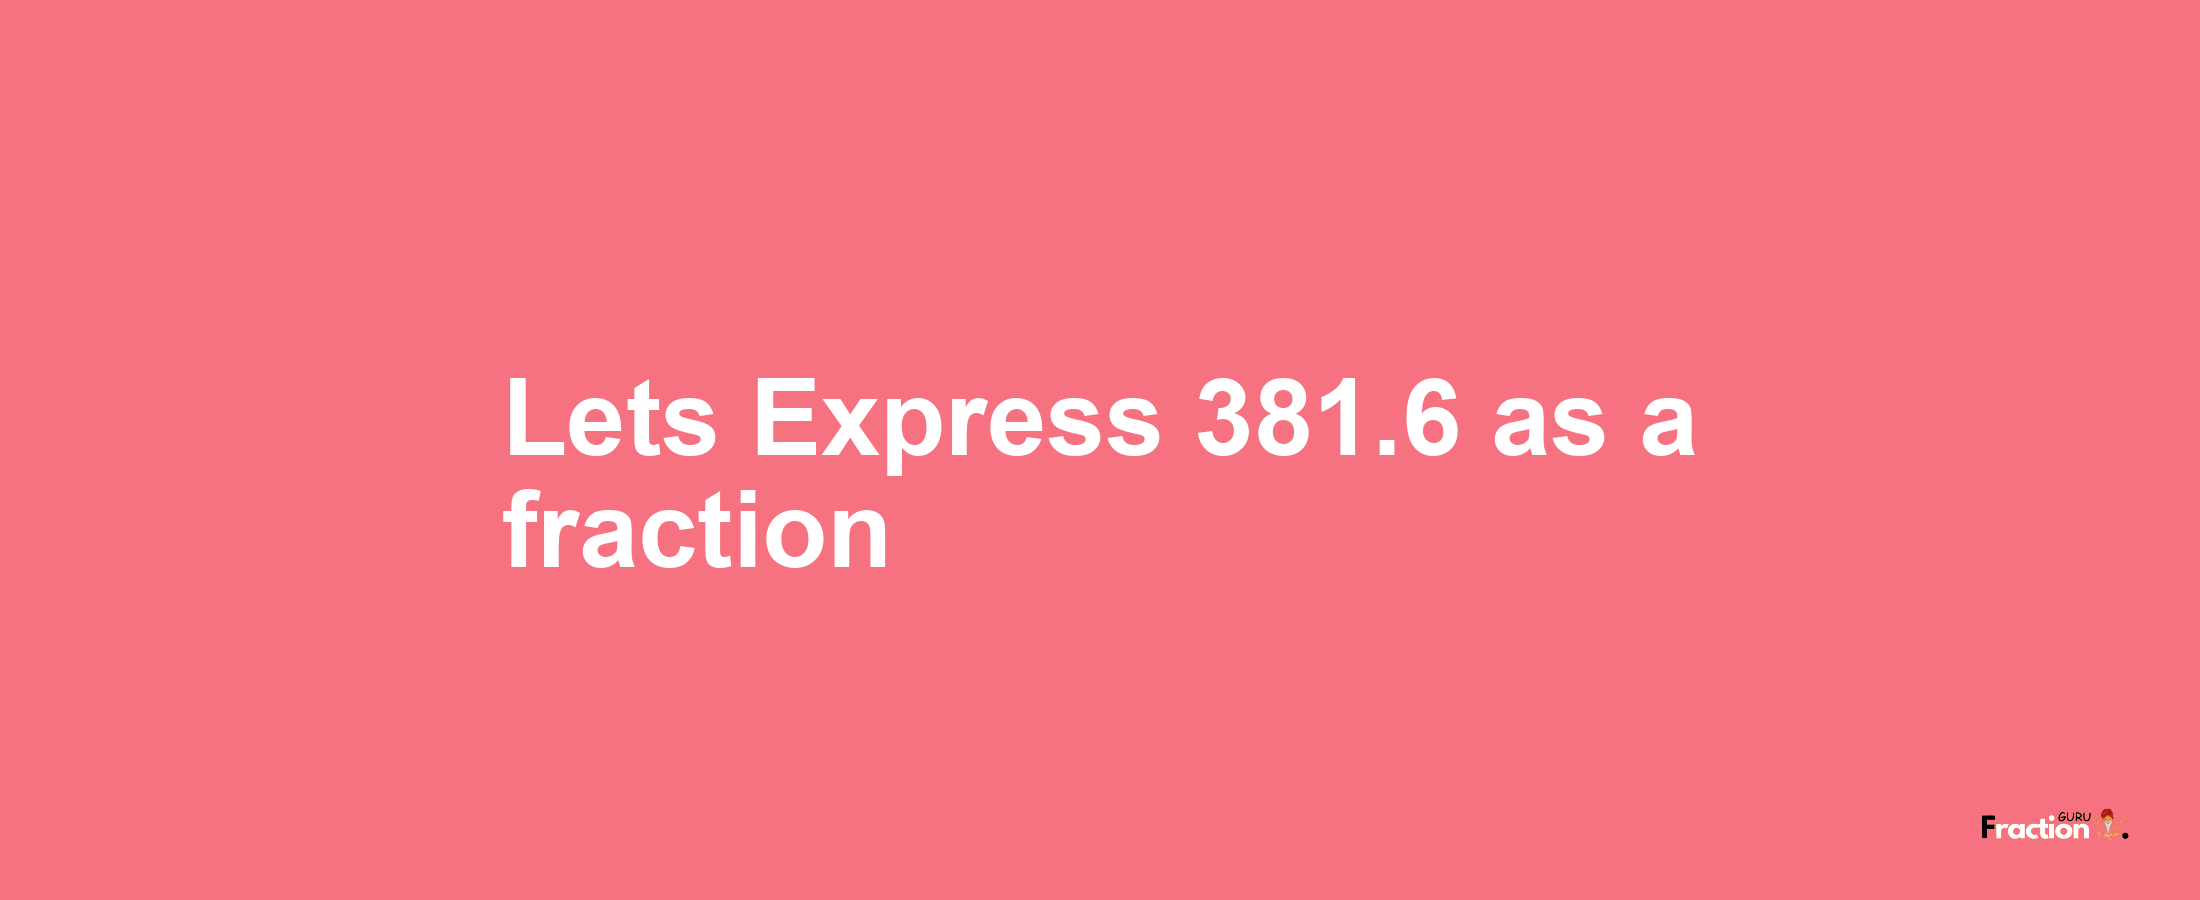 Lets Express 381.6 as afraction